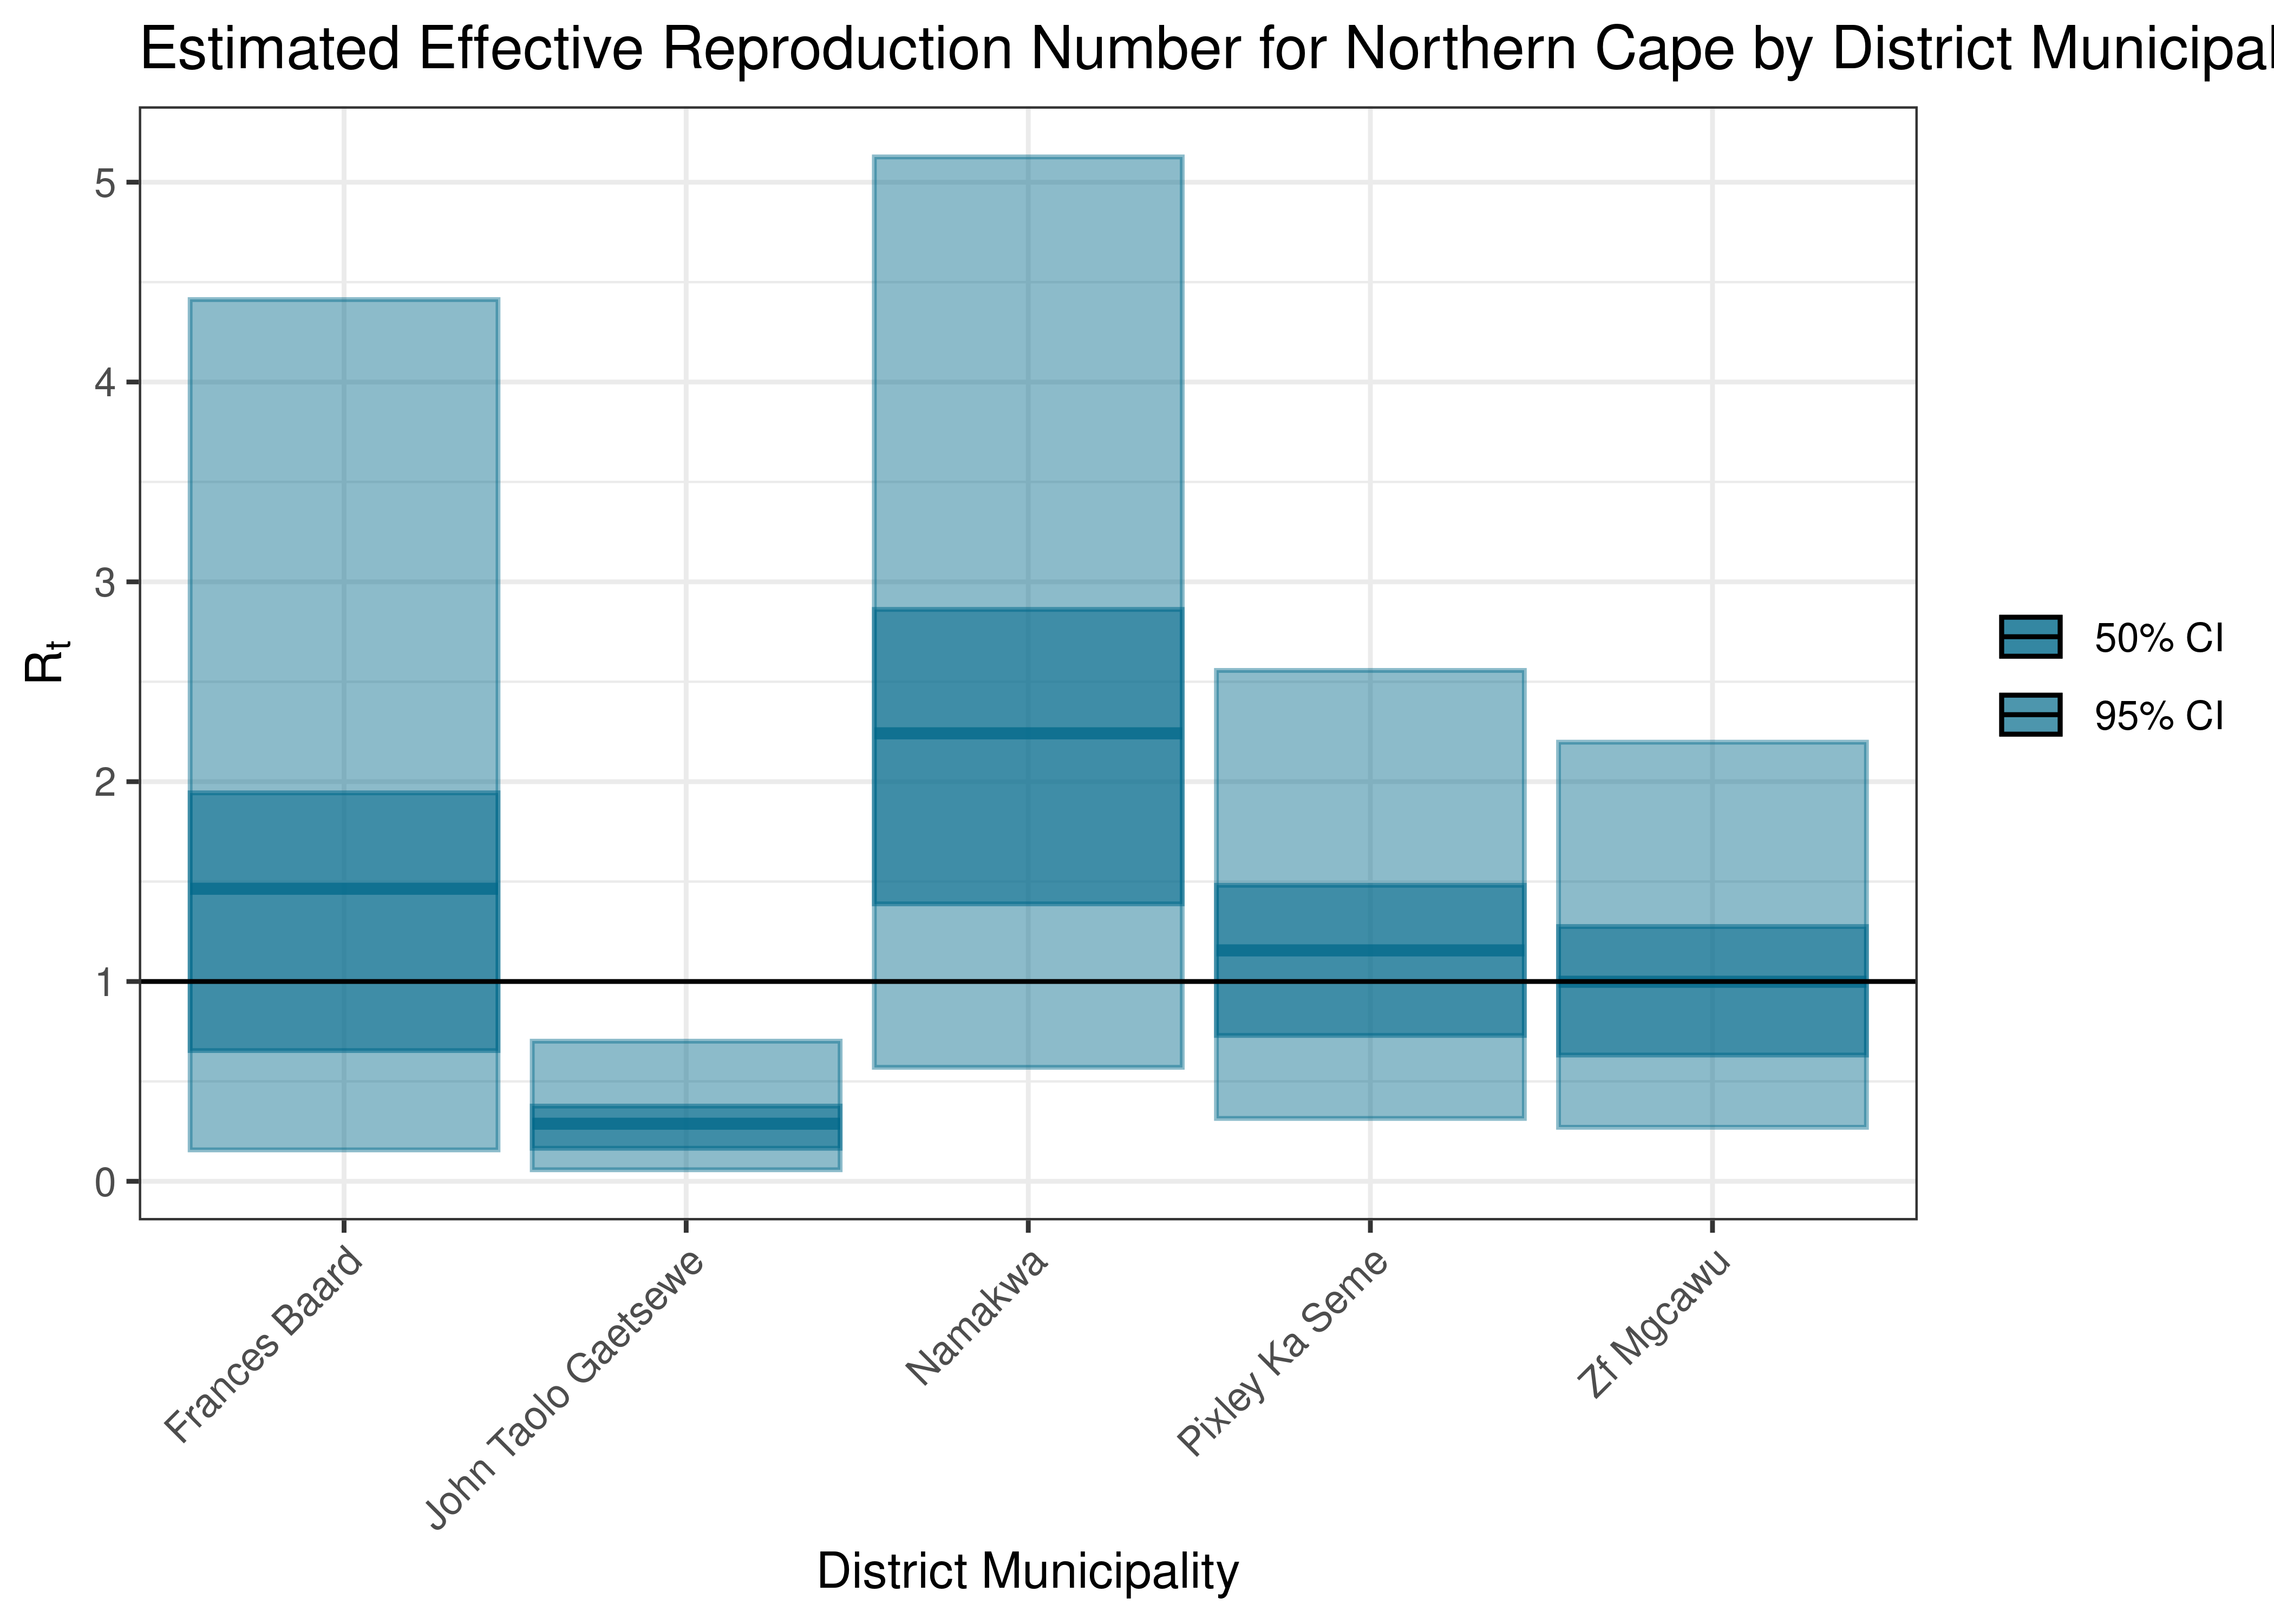 Estimated Effective Reproduction Number for Northern Cape by District Municipality